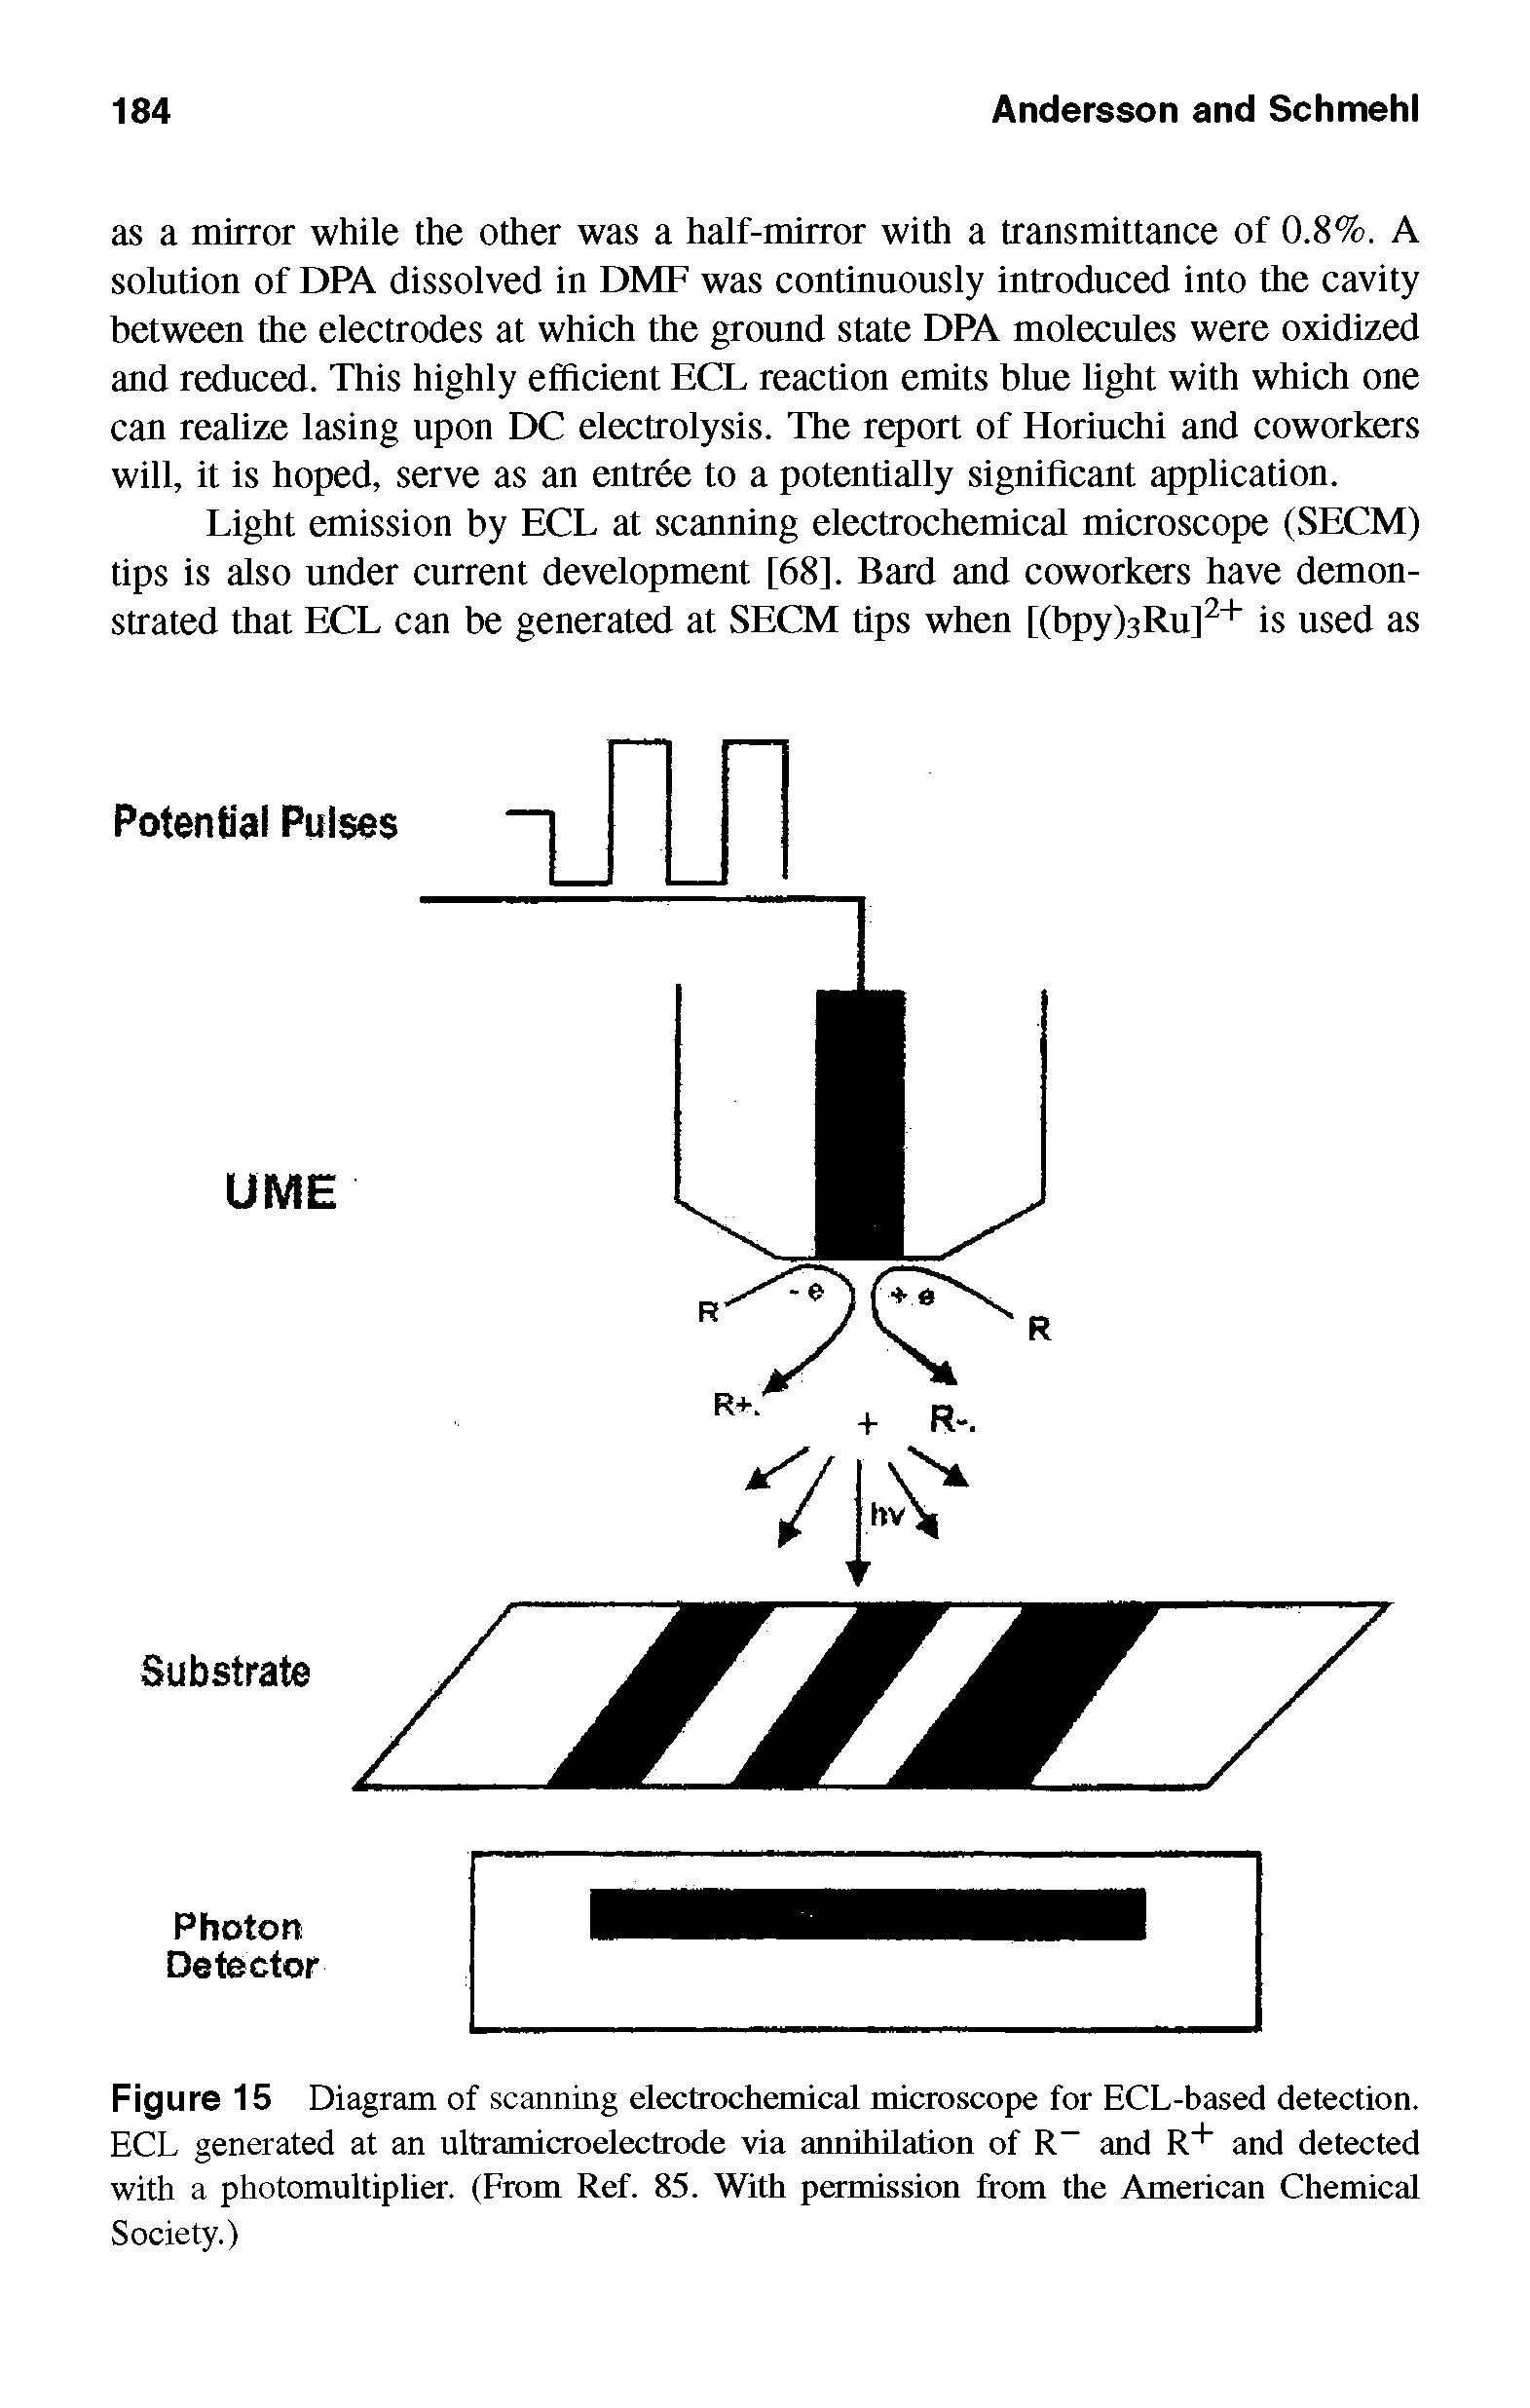 Figure 15 Diagram of scanning electrochemical microscope for ECL-based detection. ECL generated at an ultramicroelectrode via annihilation of R and R+ and detected with a photomultiplier. (From Ref. 85. With permission from the American Chemical Society.)...